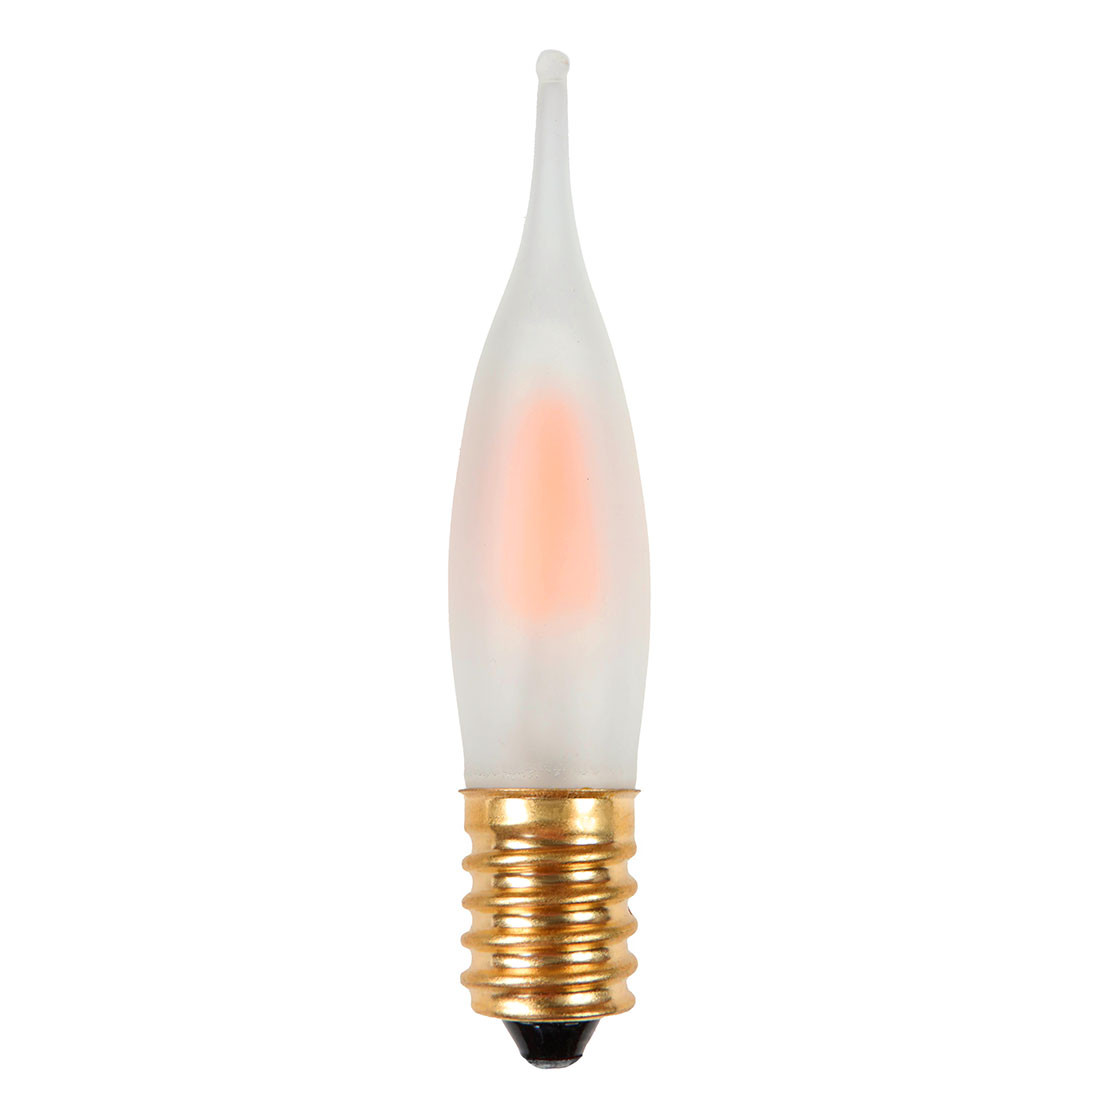 Les ampoules LED R7s basse consommation ✓ Starled